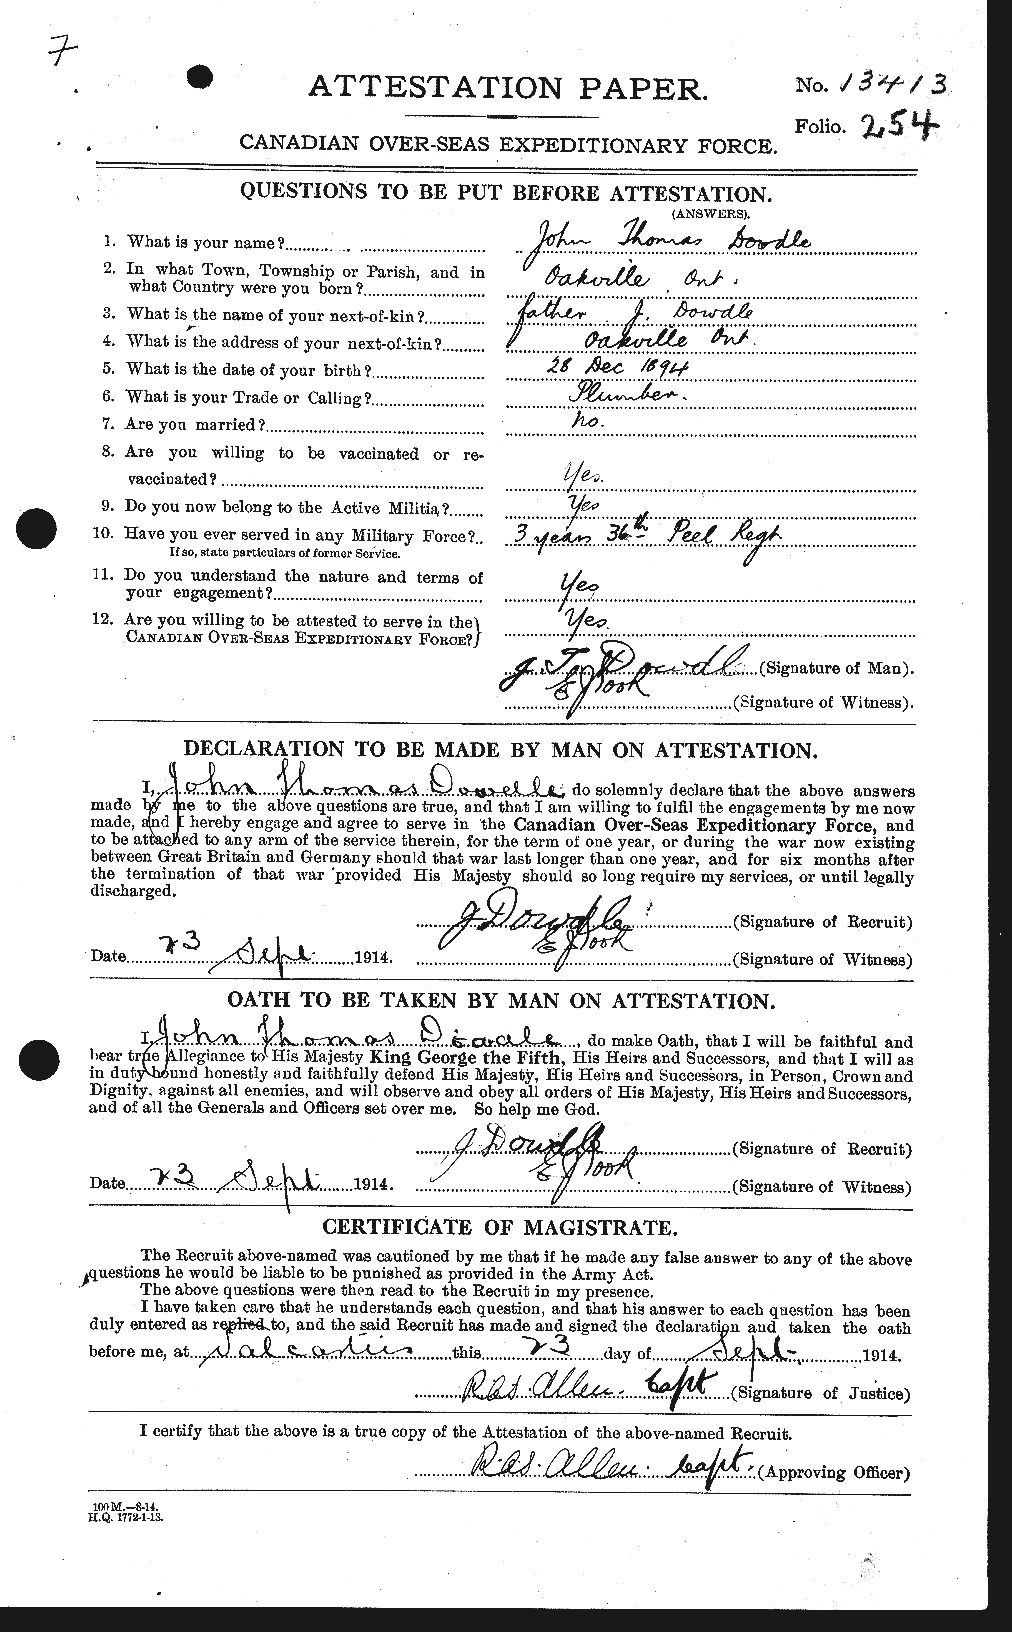 Personnel Records of the First World War - CEF 299277a